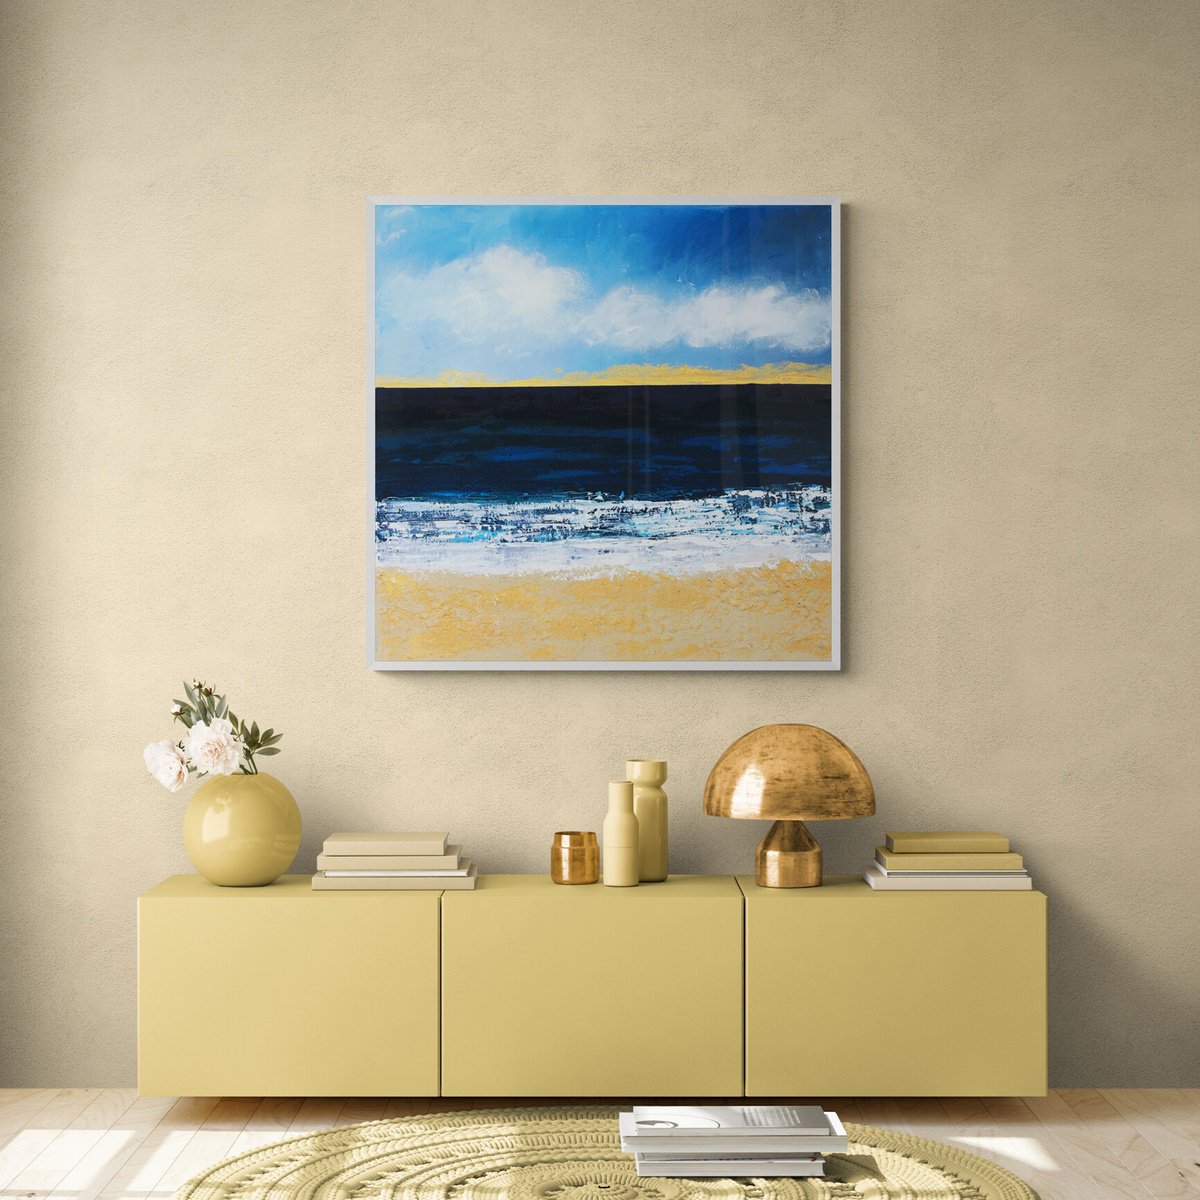 76x76cm Golden beach NEW ZEALAND ORIGINAL LUXURY PAINTING ON CANVAS AND CREATED IN NIGHT D... by Olya Shevel